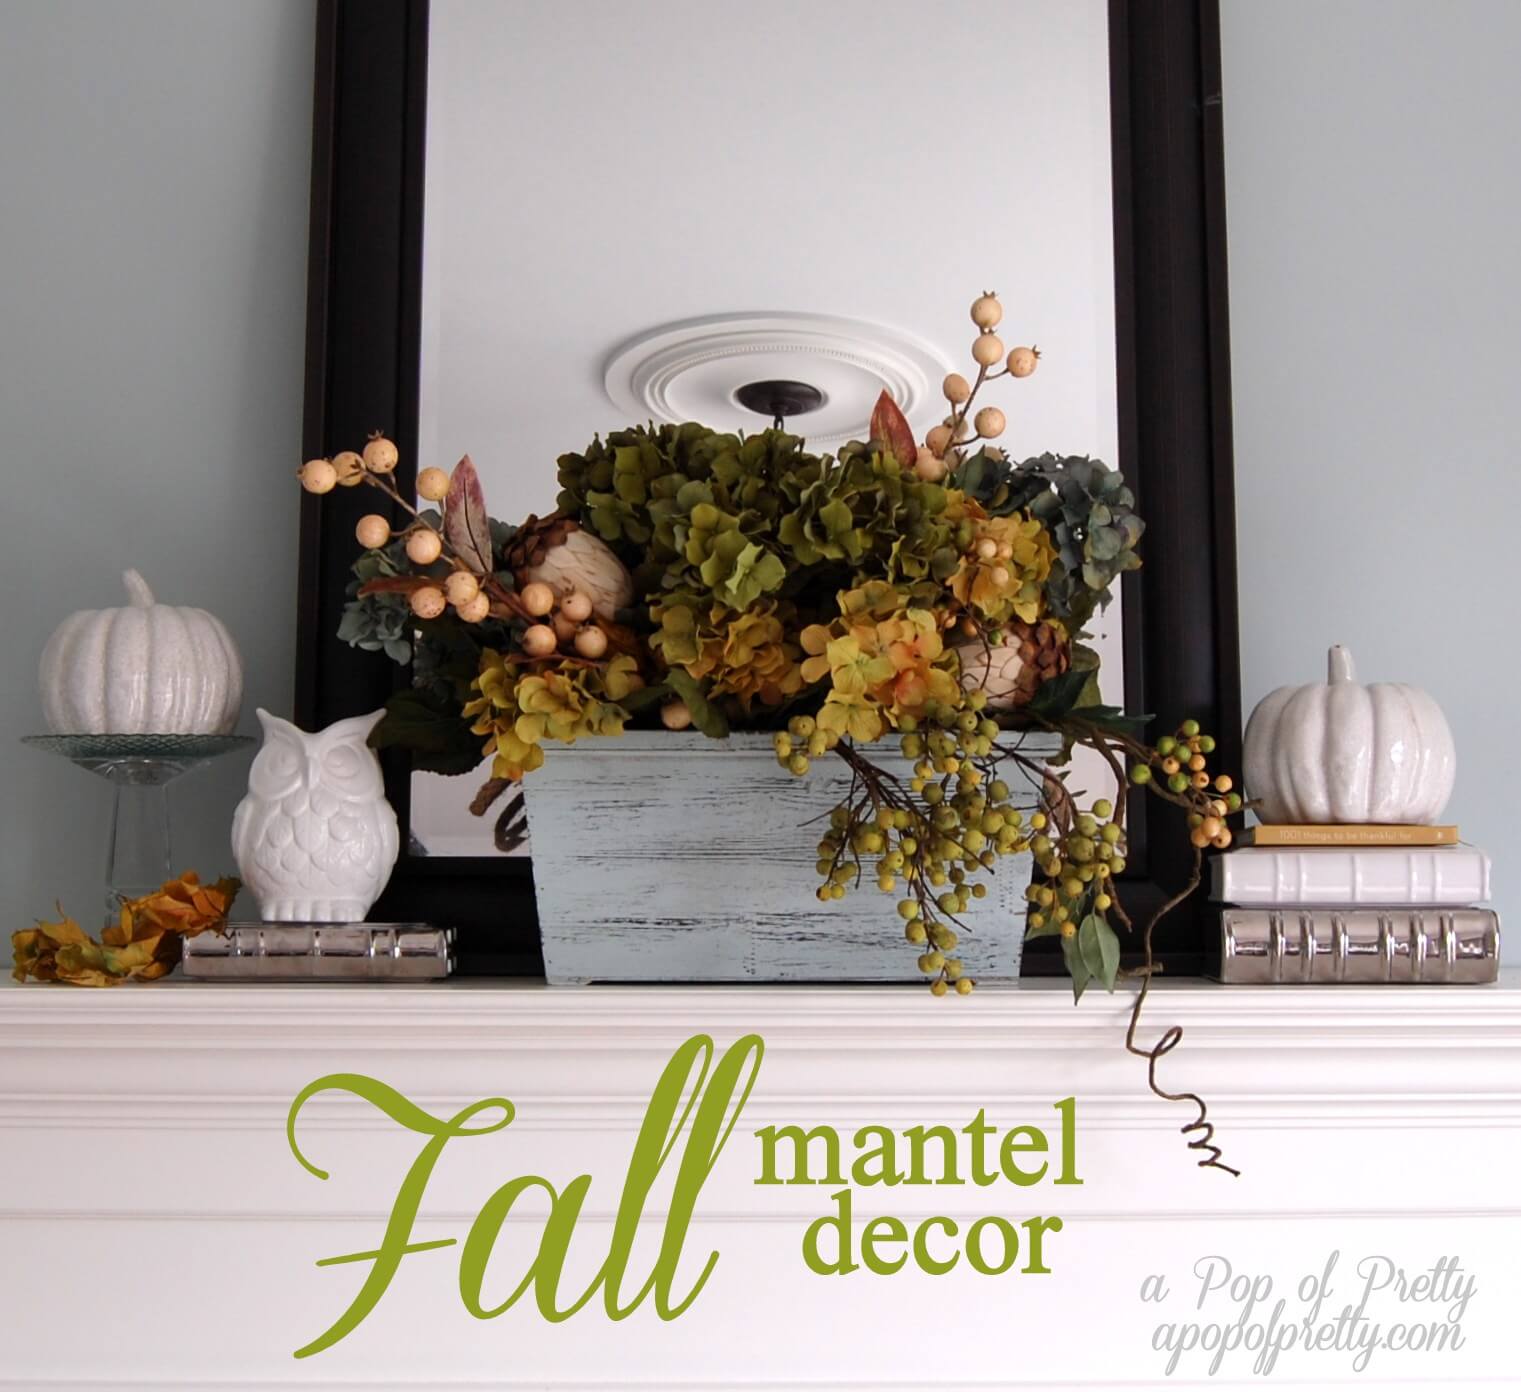 White Details Freshen up Traditional Colors | Fall Mantel Decorating Ideas For Halloween